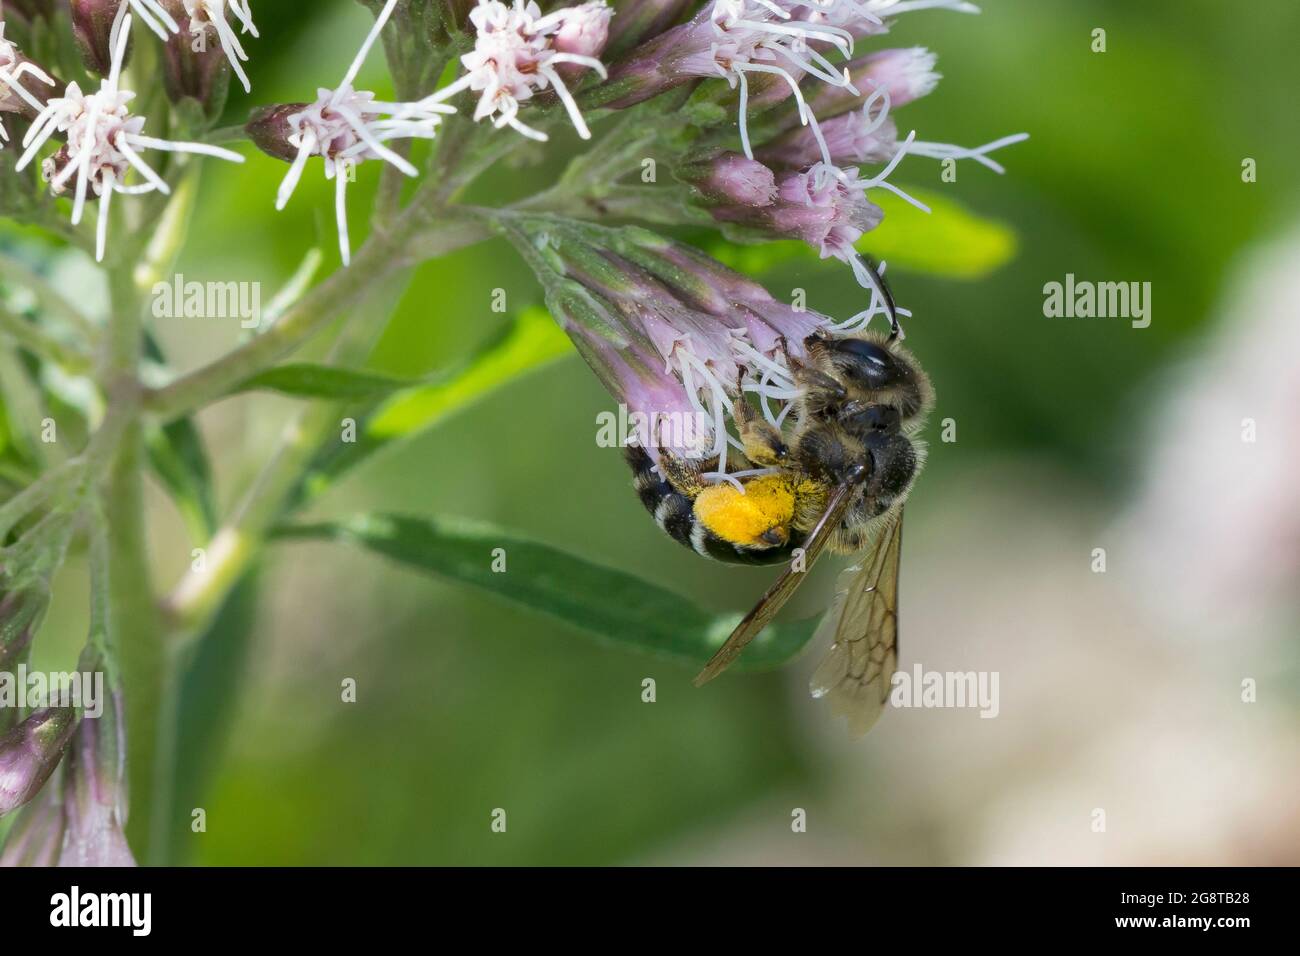 Yellow-legged Mining-bee (Andrena flavipes), searchinf for nectar on boneset, pollen load, Germany Stock Photo